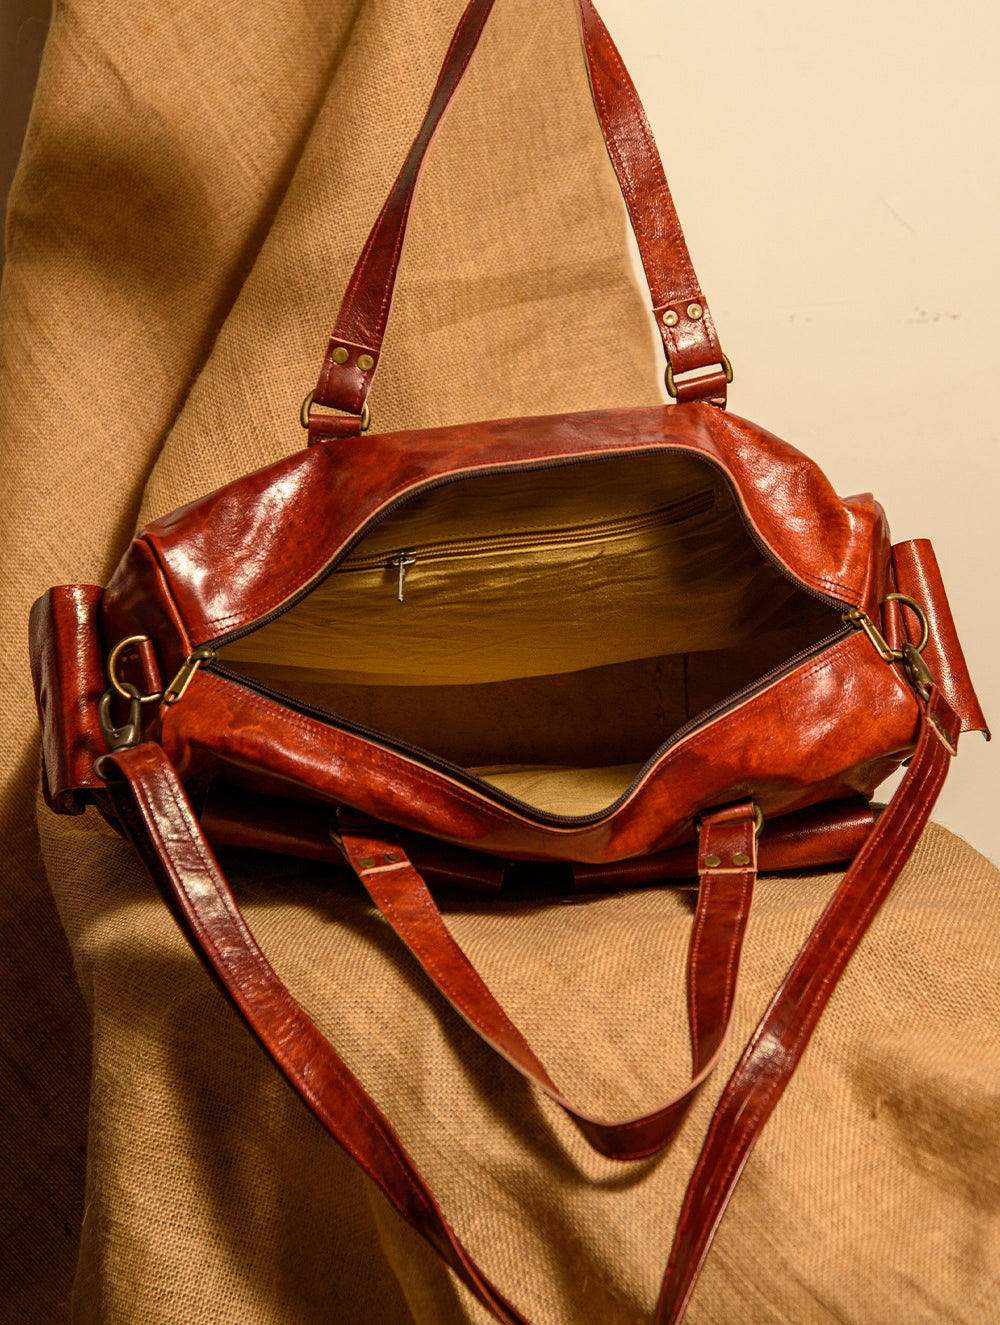 Load image into Gallery viewer, Handcrafted Jawaja Leather Tote / Laptop / Utility Bag with Hand Stitch Detail